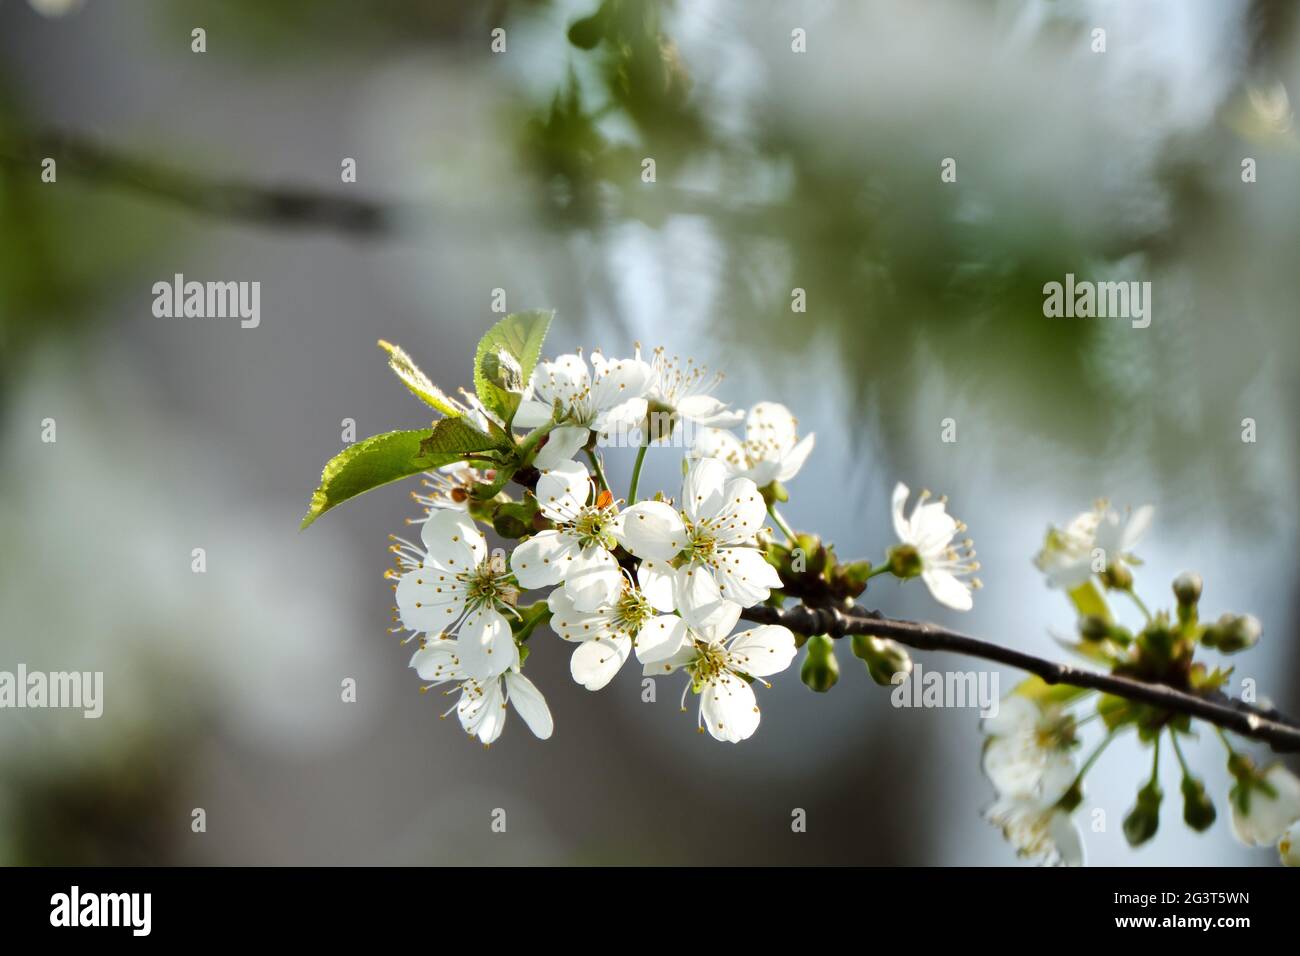 North star cherry tree blossoms in Spring with blurry background Stock Photo